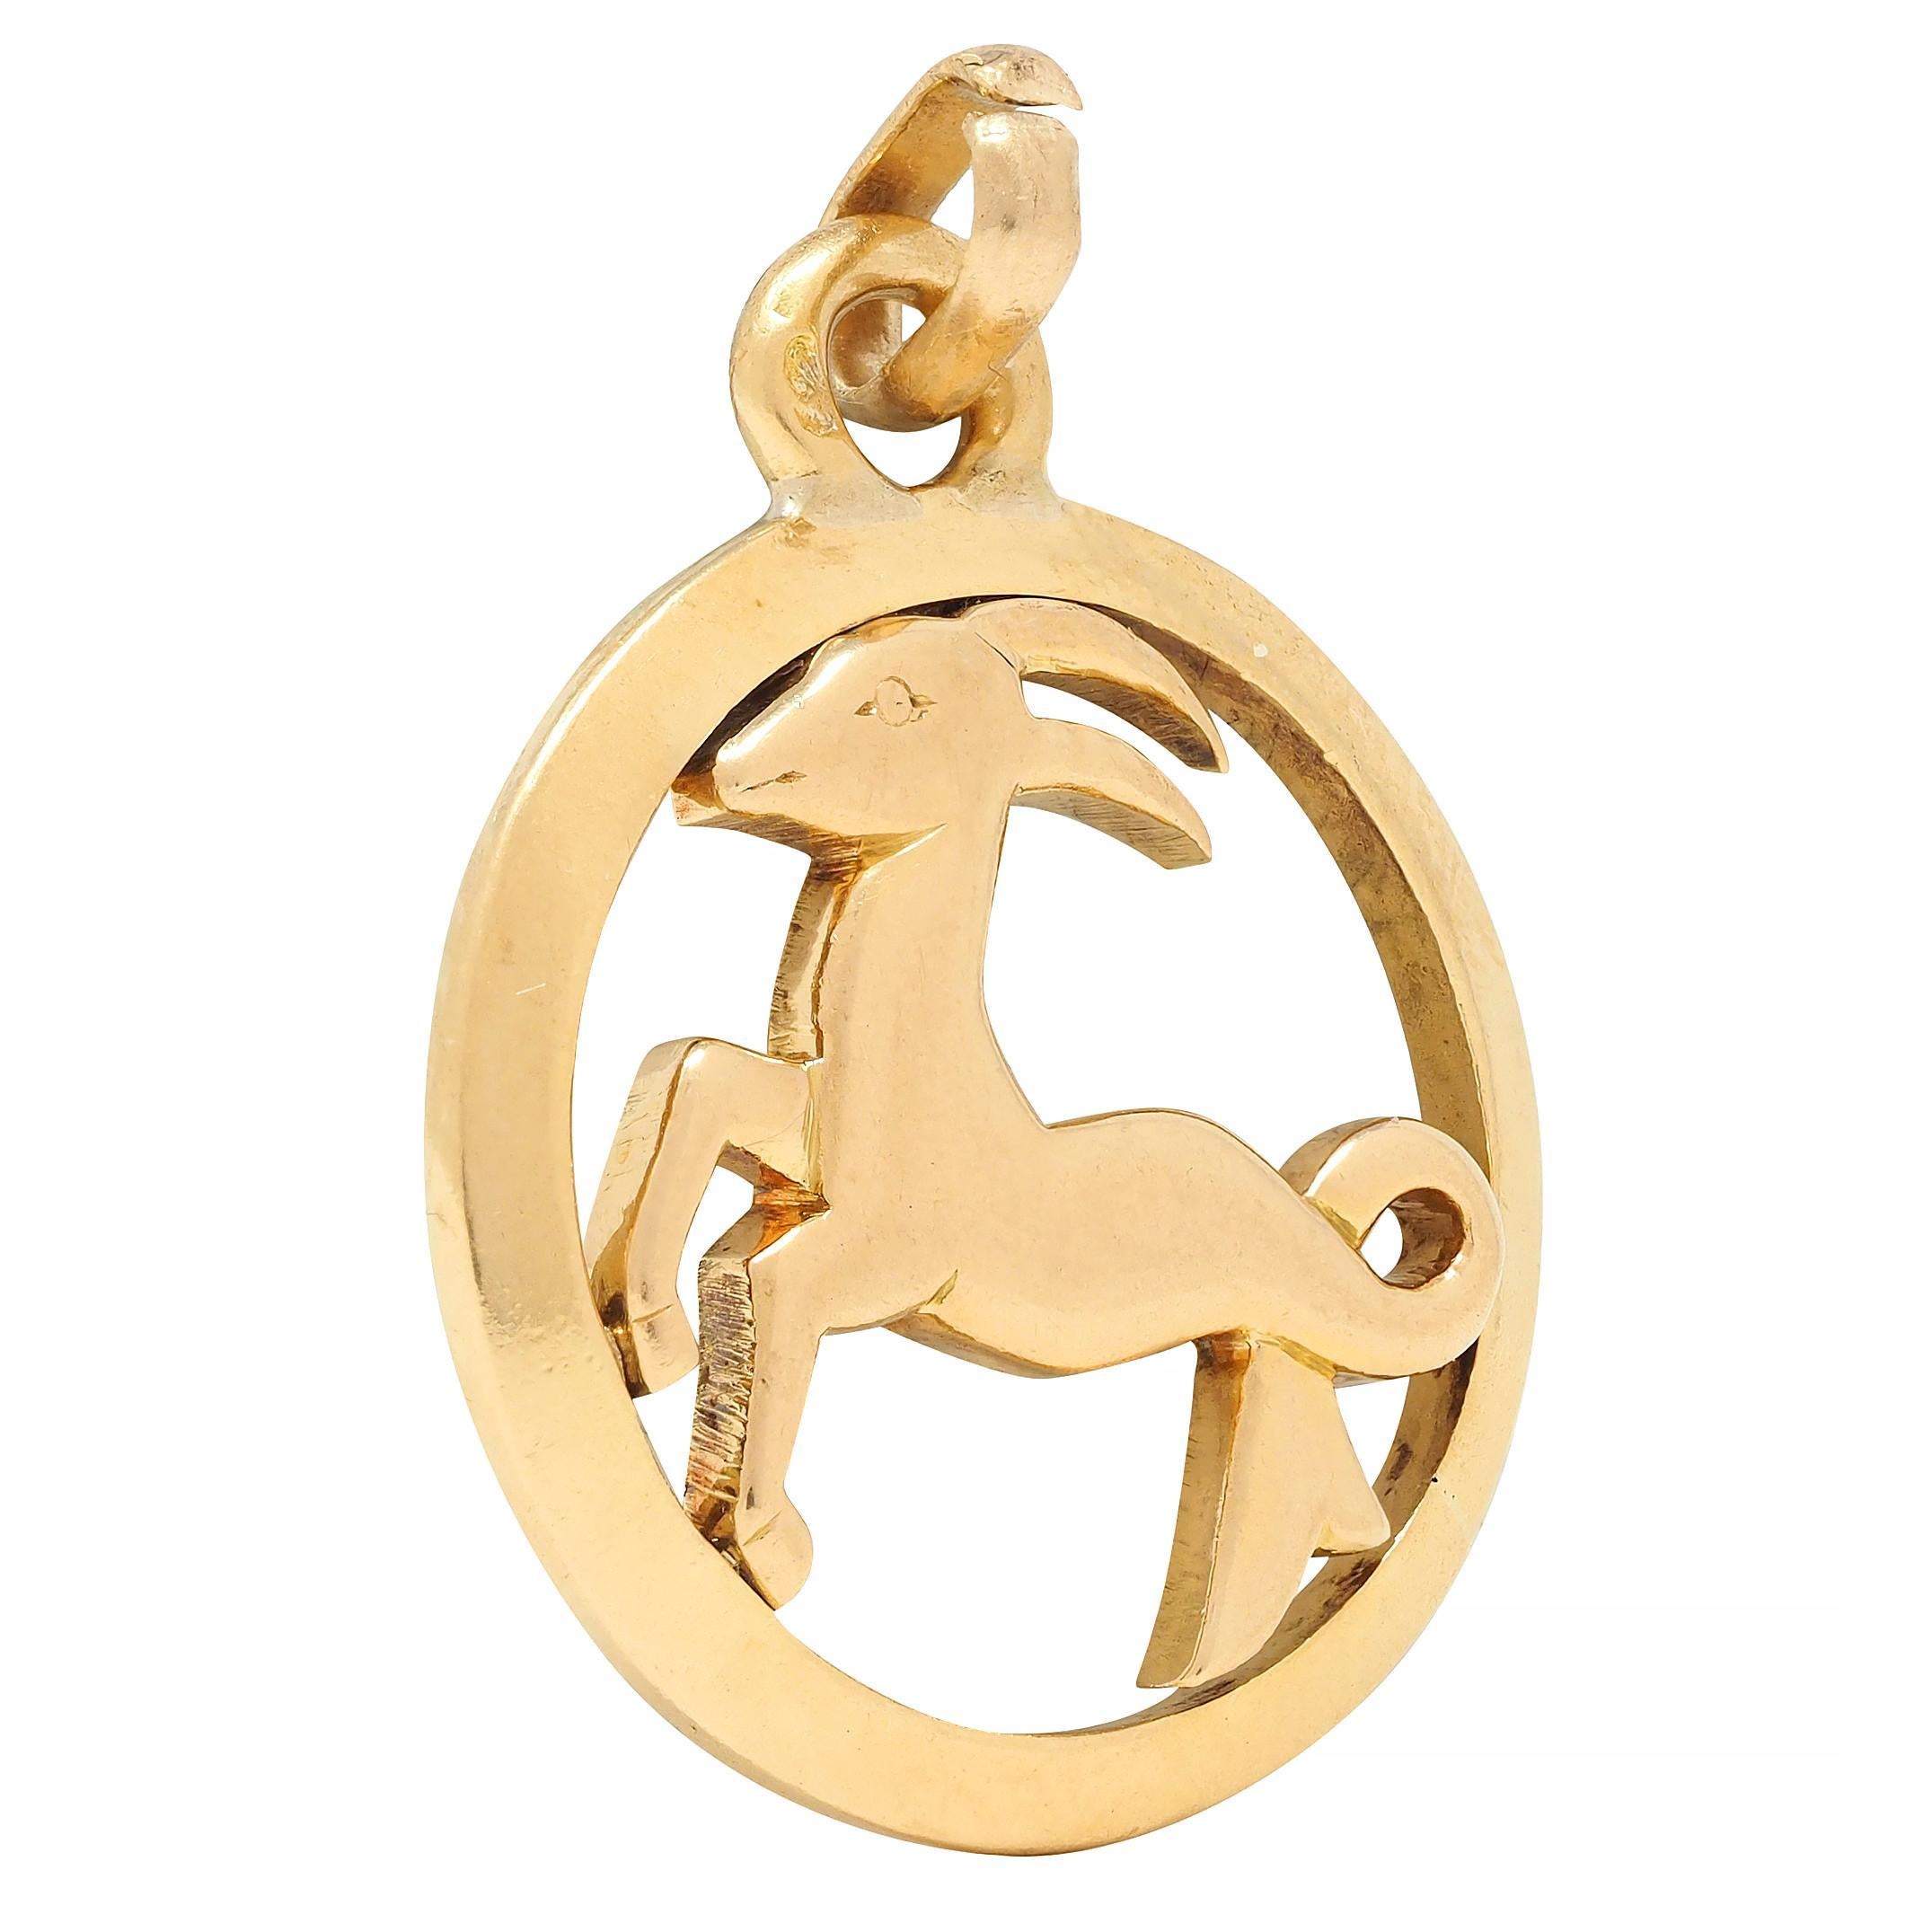 Designed as a stylized Capricorn figure with minimalist features
Centered in a pierced round frame surround
Suspending from jump ring bale
Stamped with French hallmark for 18 karat gold
Numbered and fully signed for Cartier
Circa: 20th